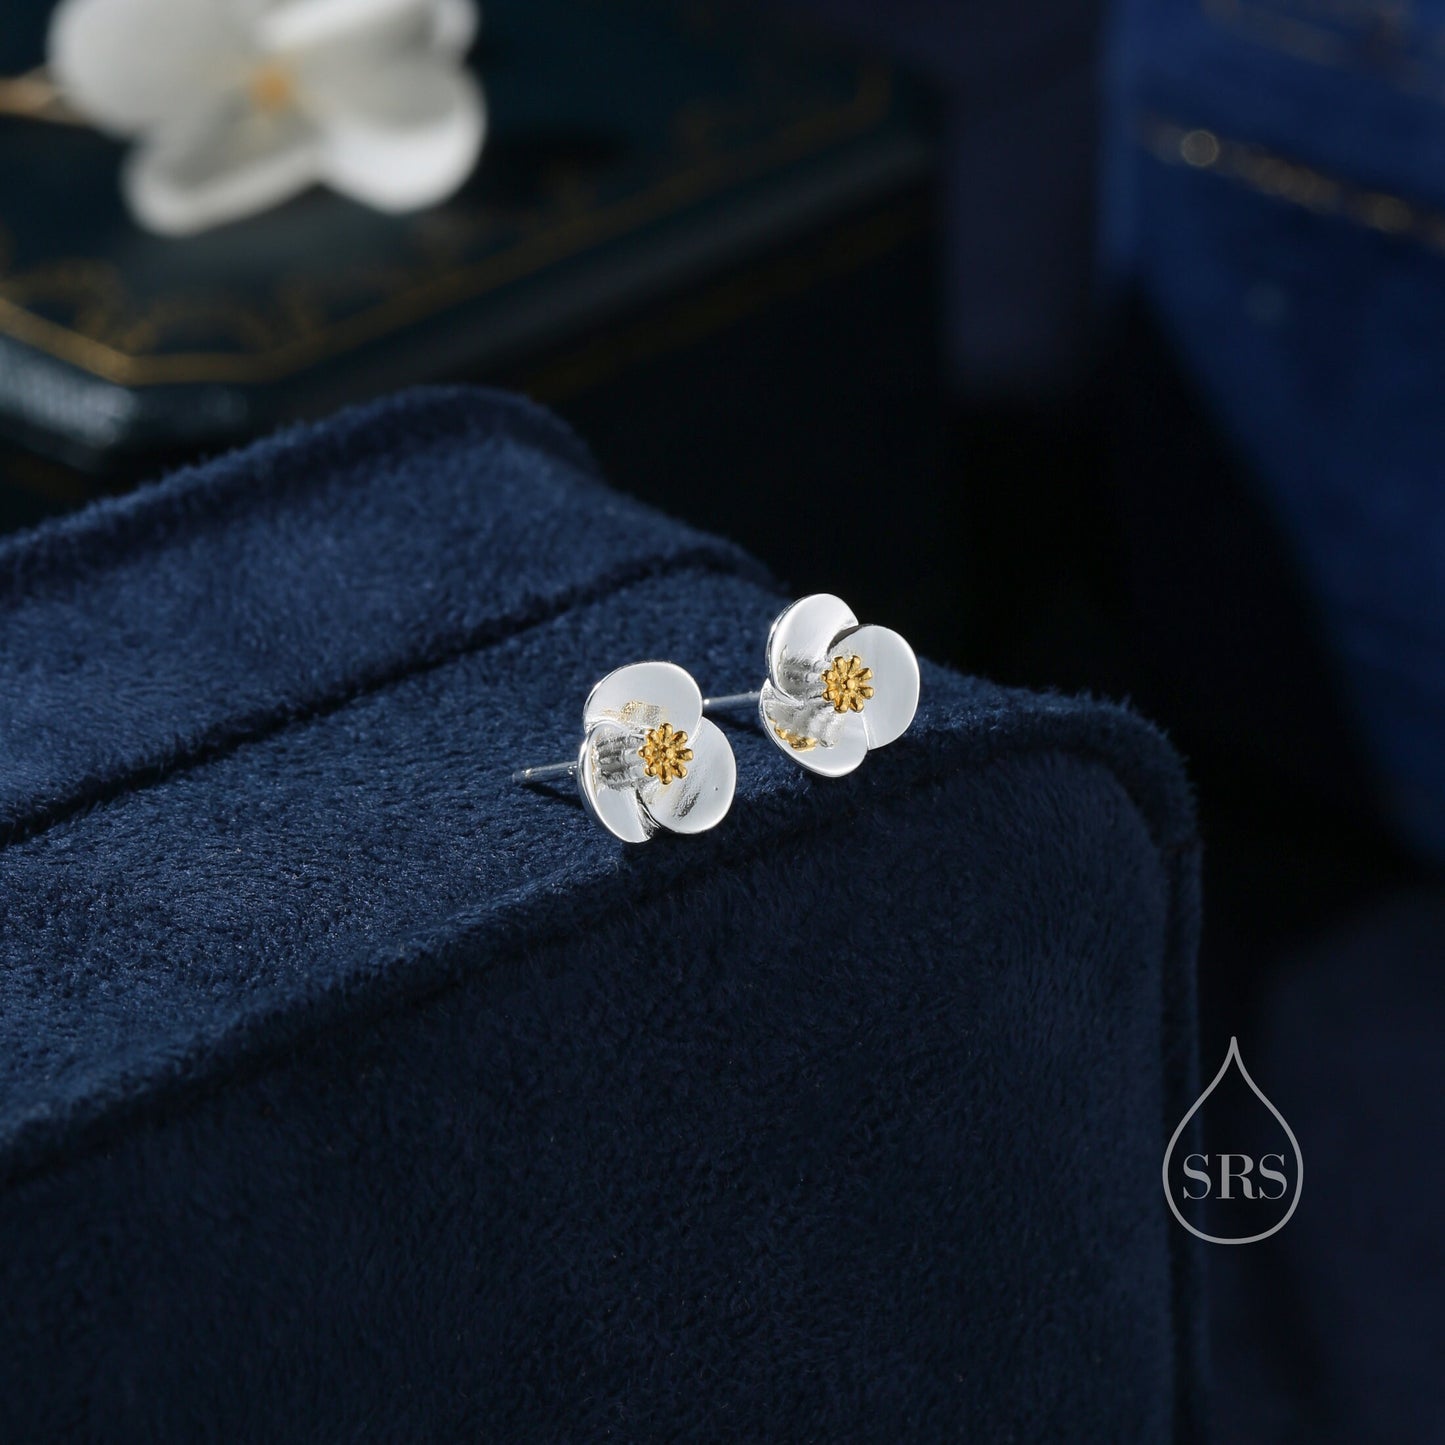 Poppy Flower Stud Earrings in Sterling Silver- Gold and Silver Two Tone - Flower Earrings - Blossom Earrings,  Fun, Whimsical and Pretty